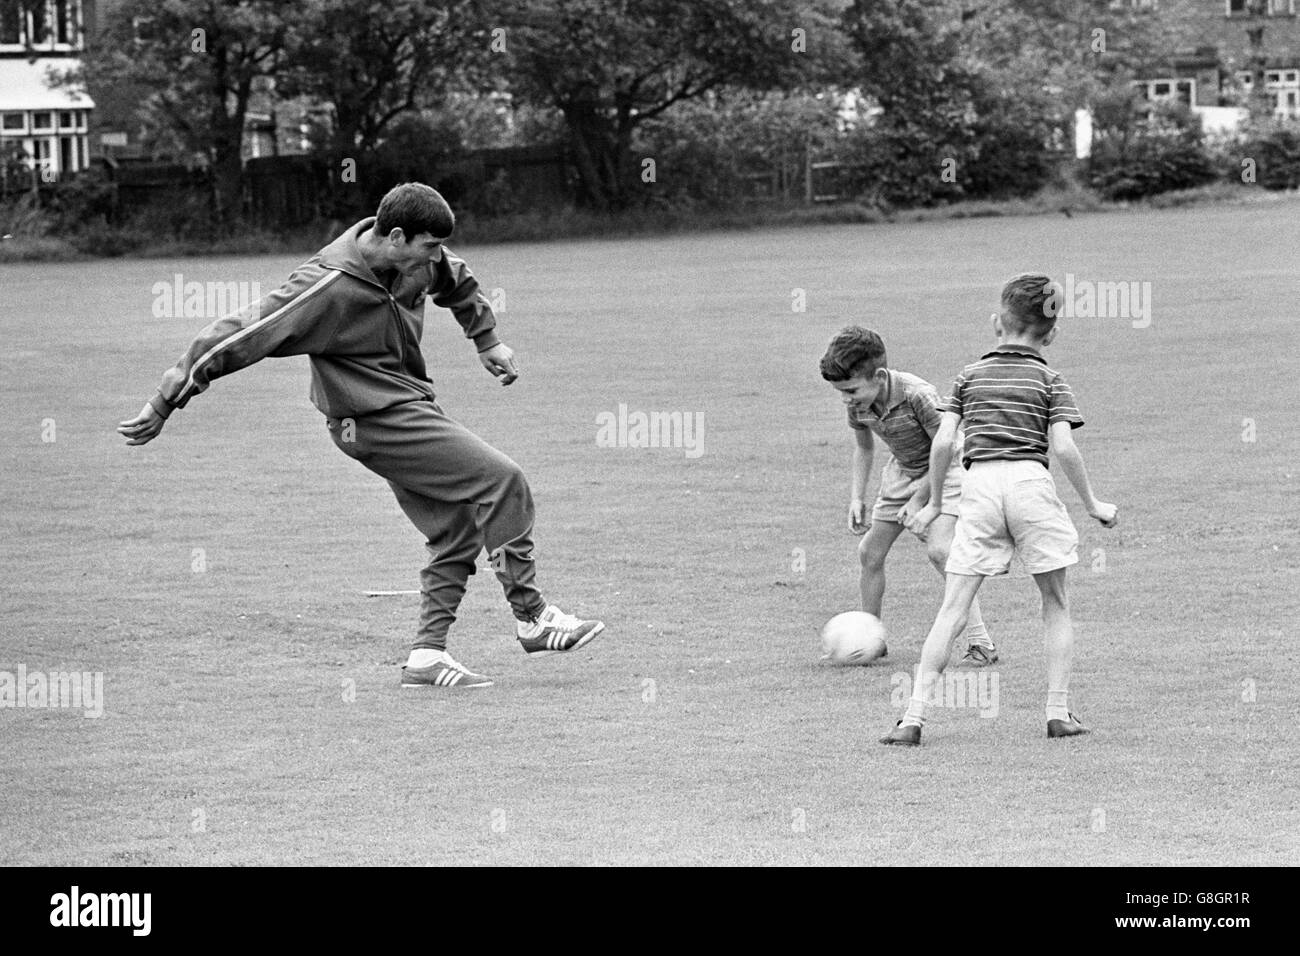 Soccer - World Cup England 1966 - Spain Training - Delta Metals Sports Ground. Spain's Silvestre Eladio (l) takes on the combined force of brothers Francis and Patrick McNally during a break from training Stock Photo